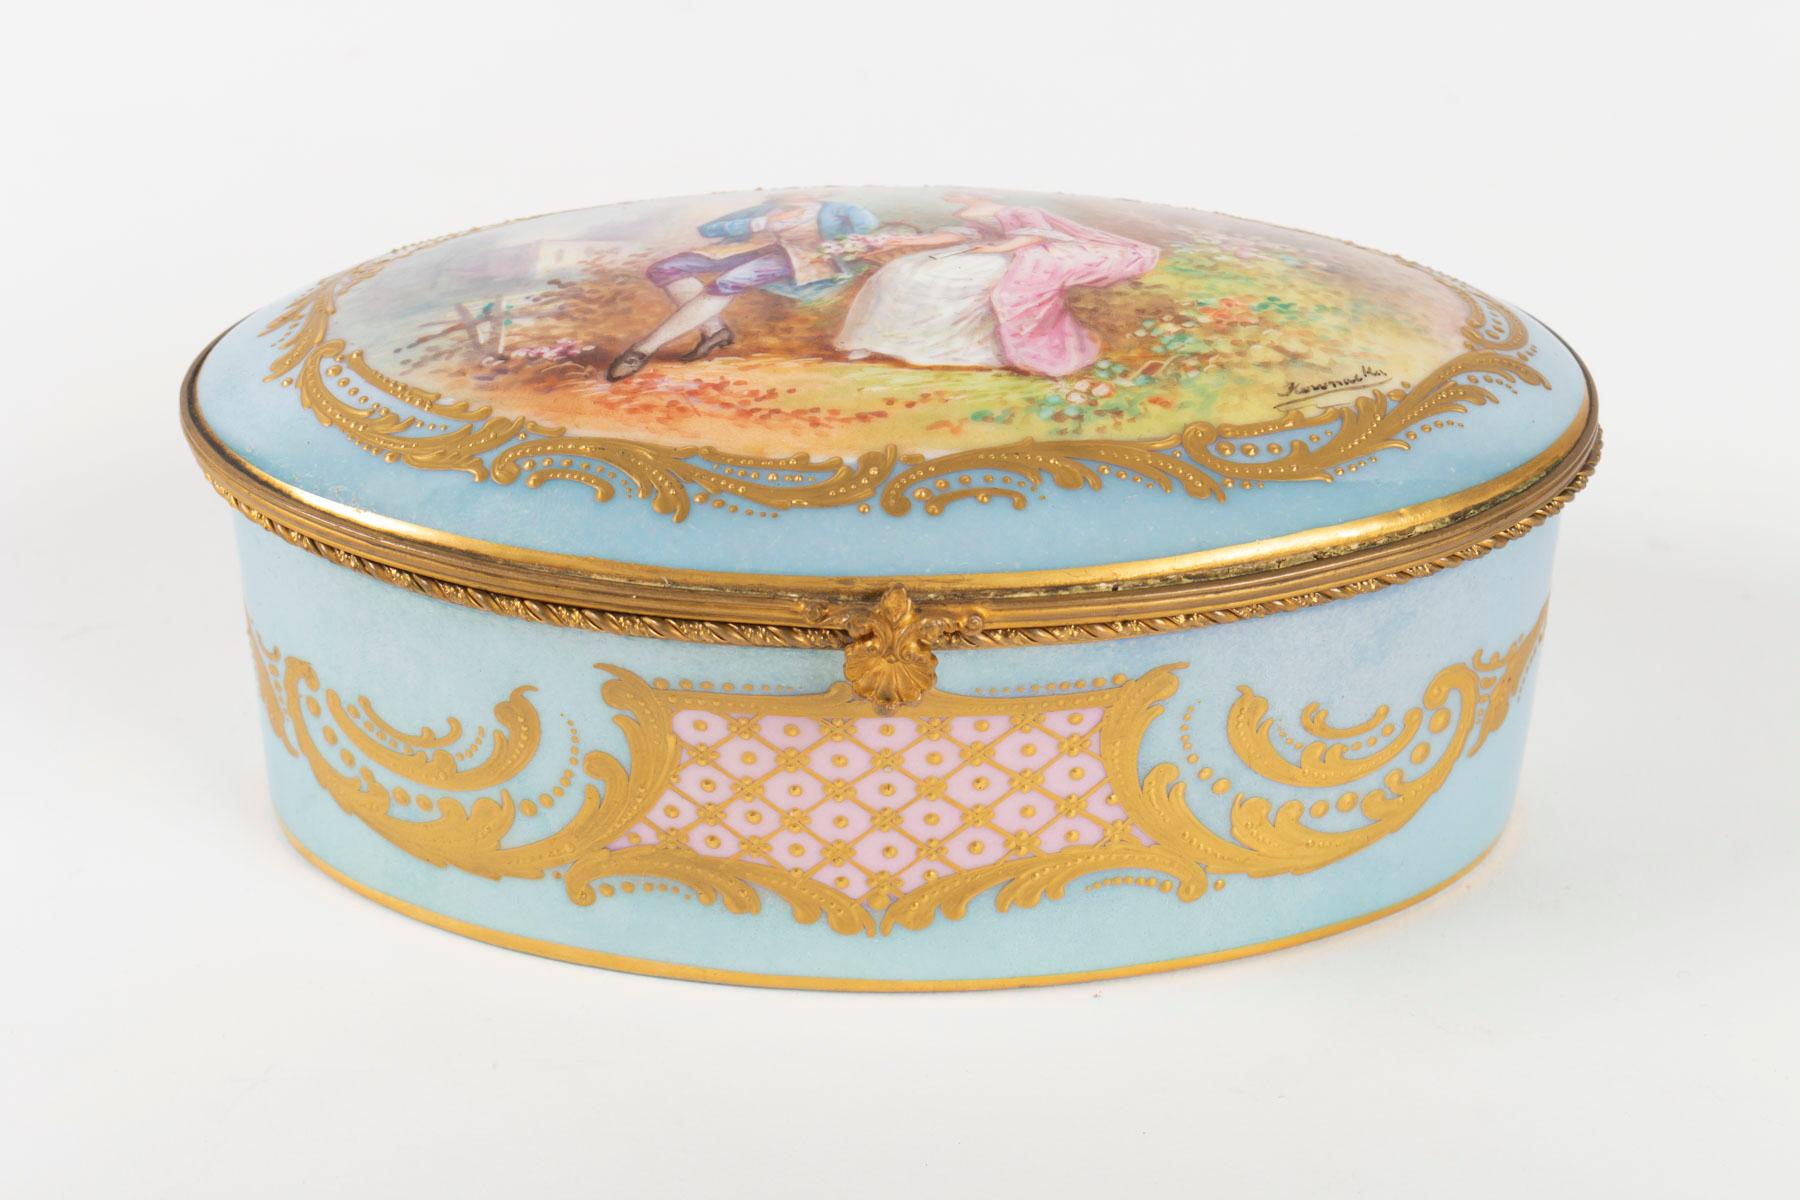 Box, 19th century, Napoleon III period, porcelain and brass frame, oval, very light blue, golden decoration and a couple of elegant seated and converting, signed, white interior decorated with flowers, sevres marks
Measures: H 7 cm, W 16 cm, P 11